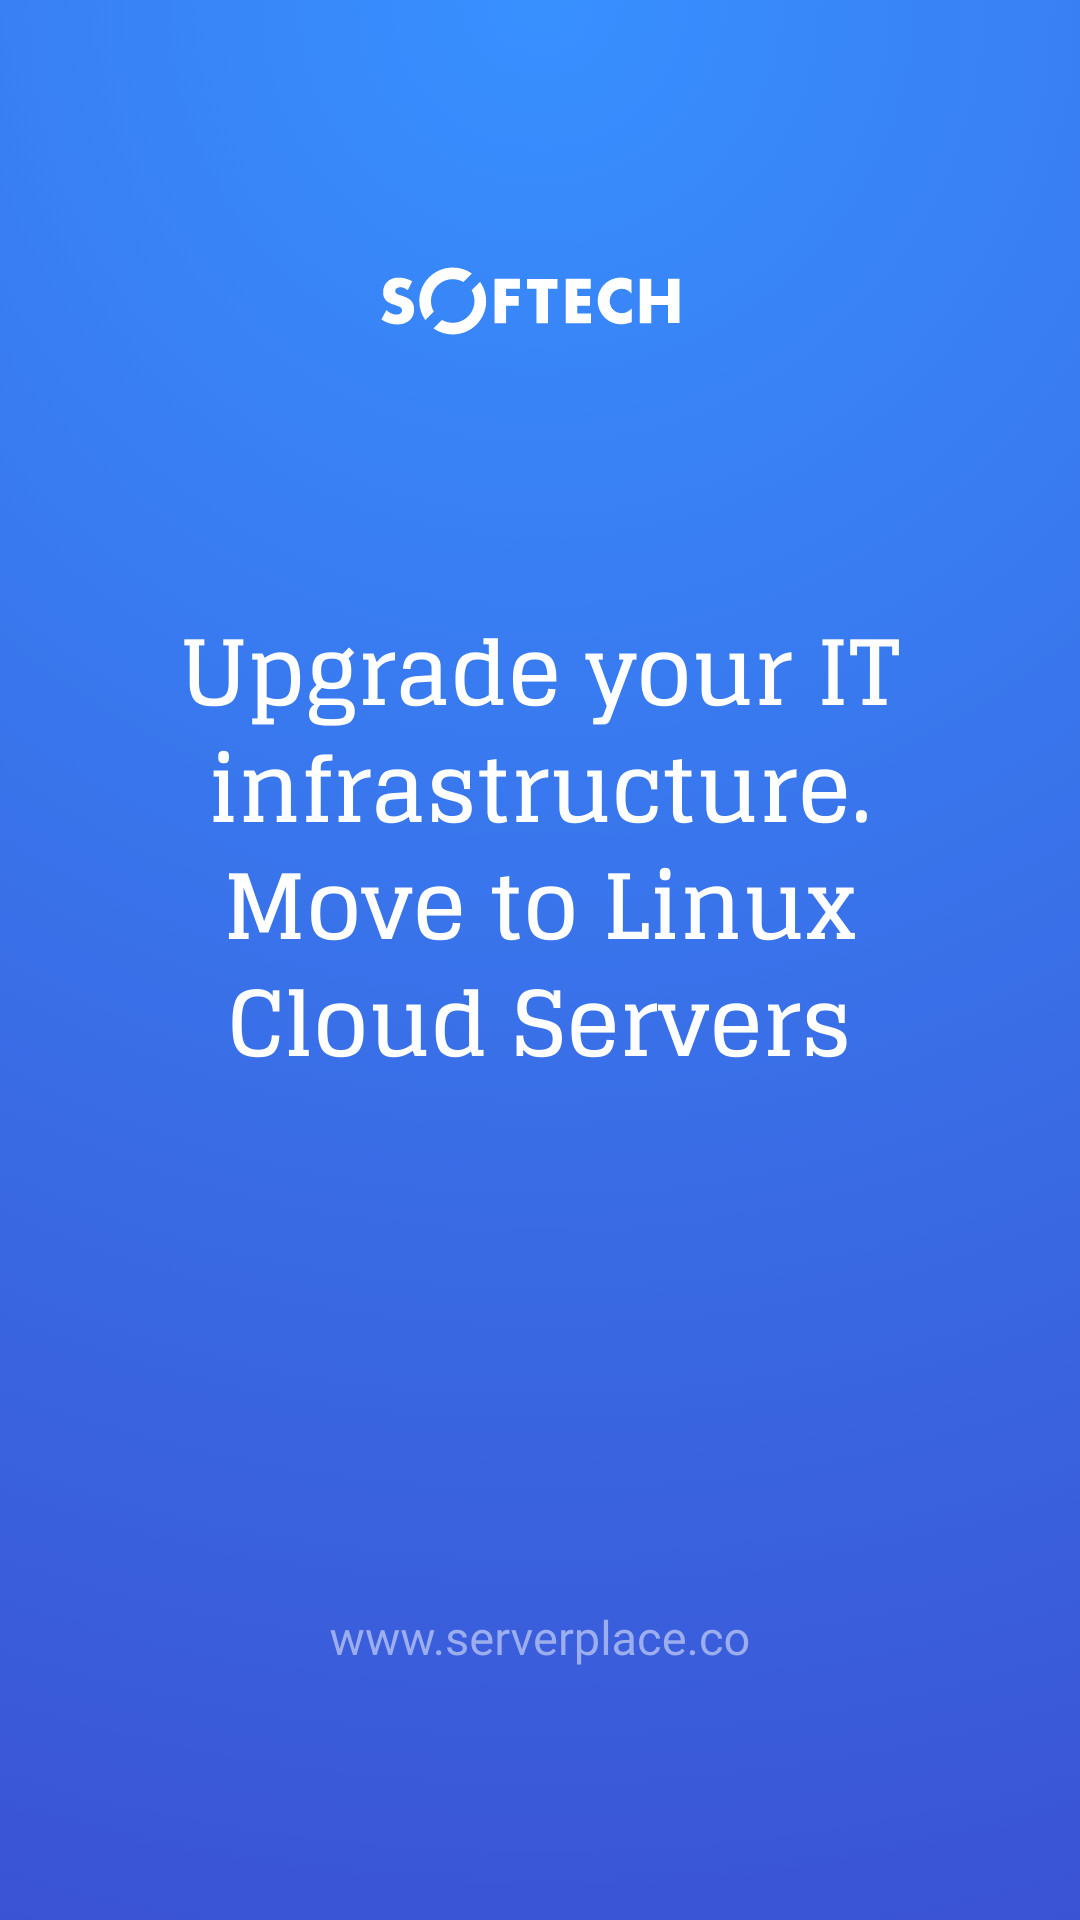 Move to Linux Cloud Servers